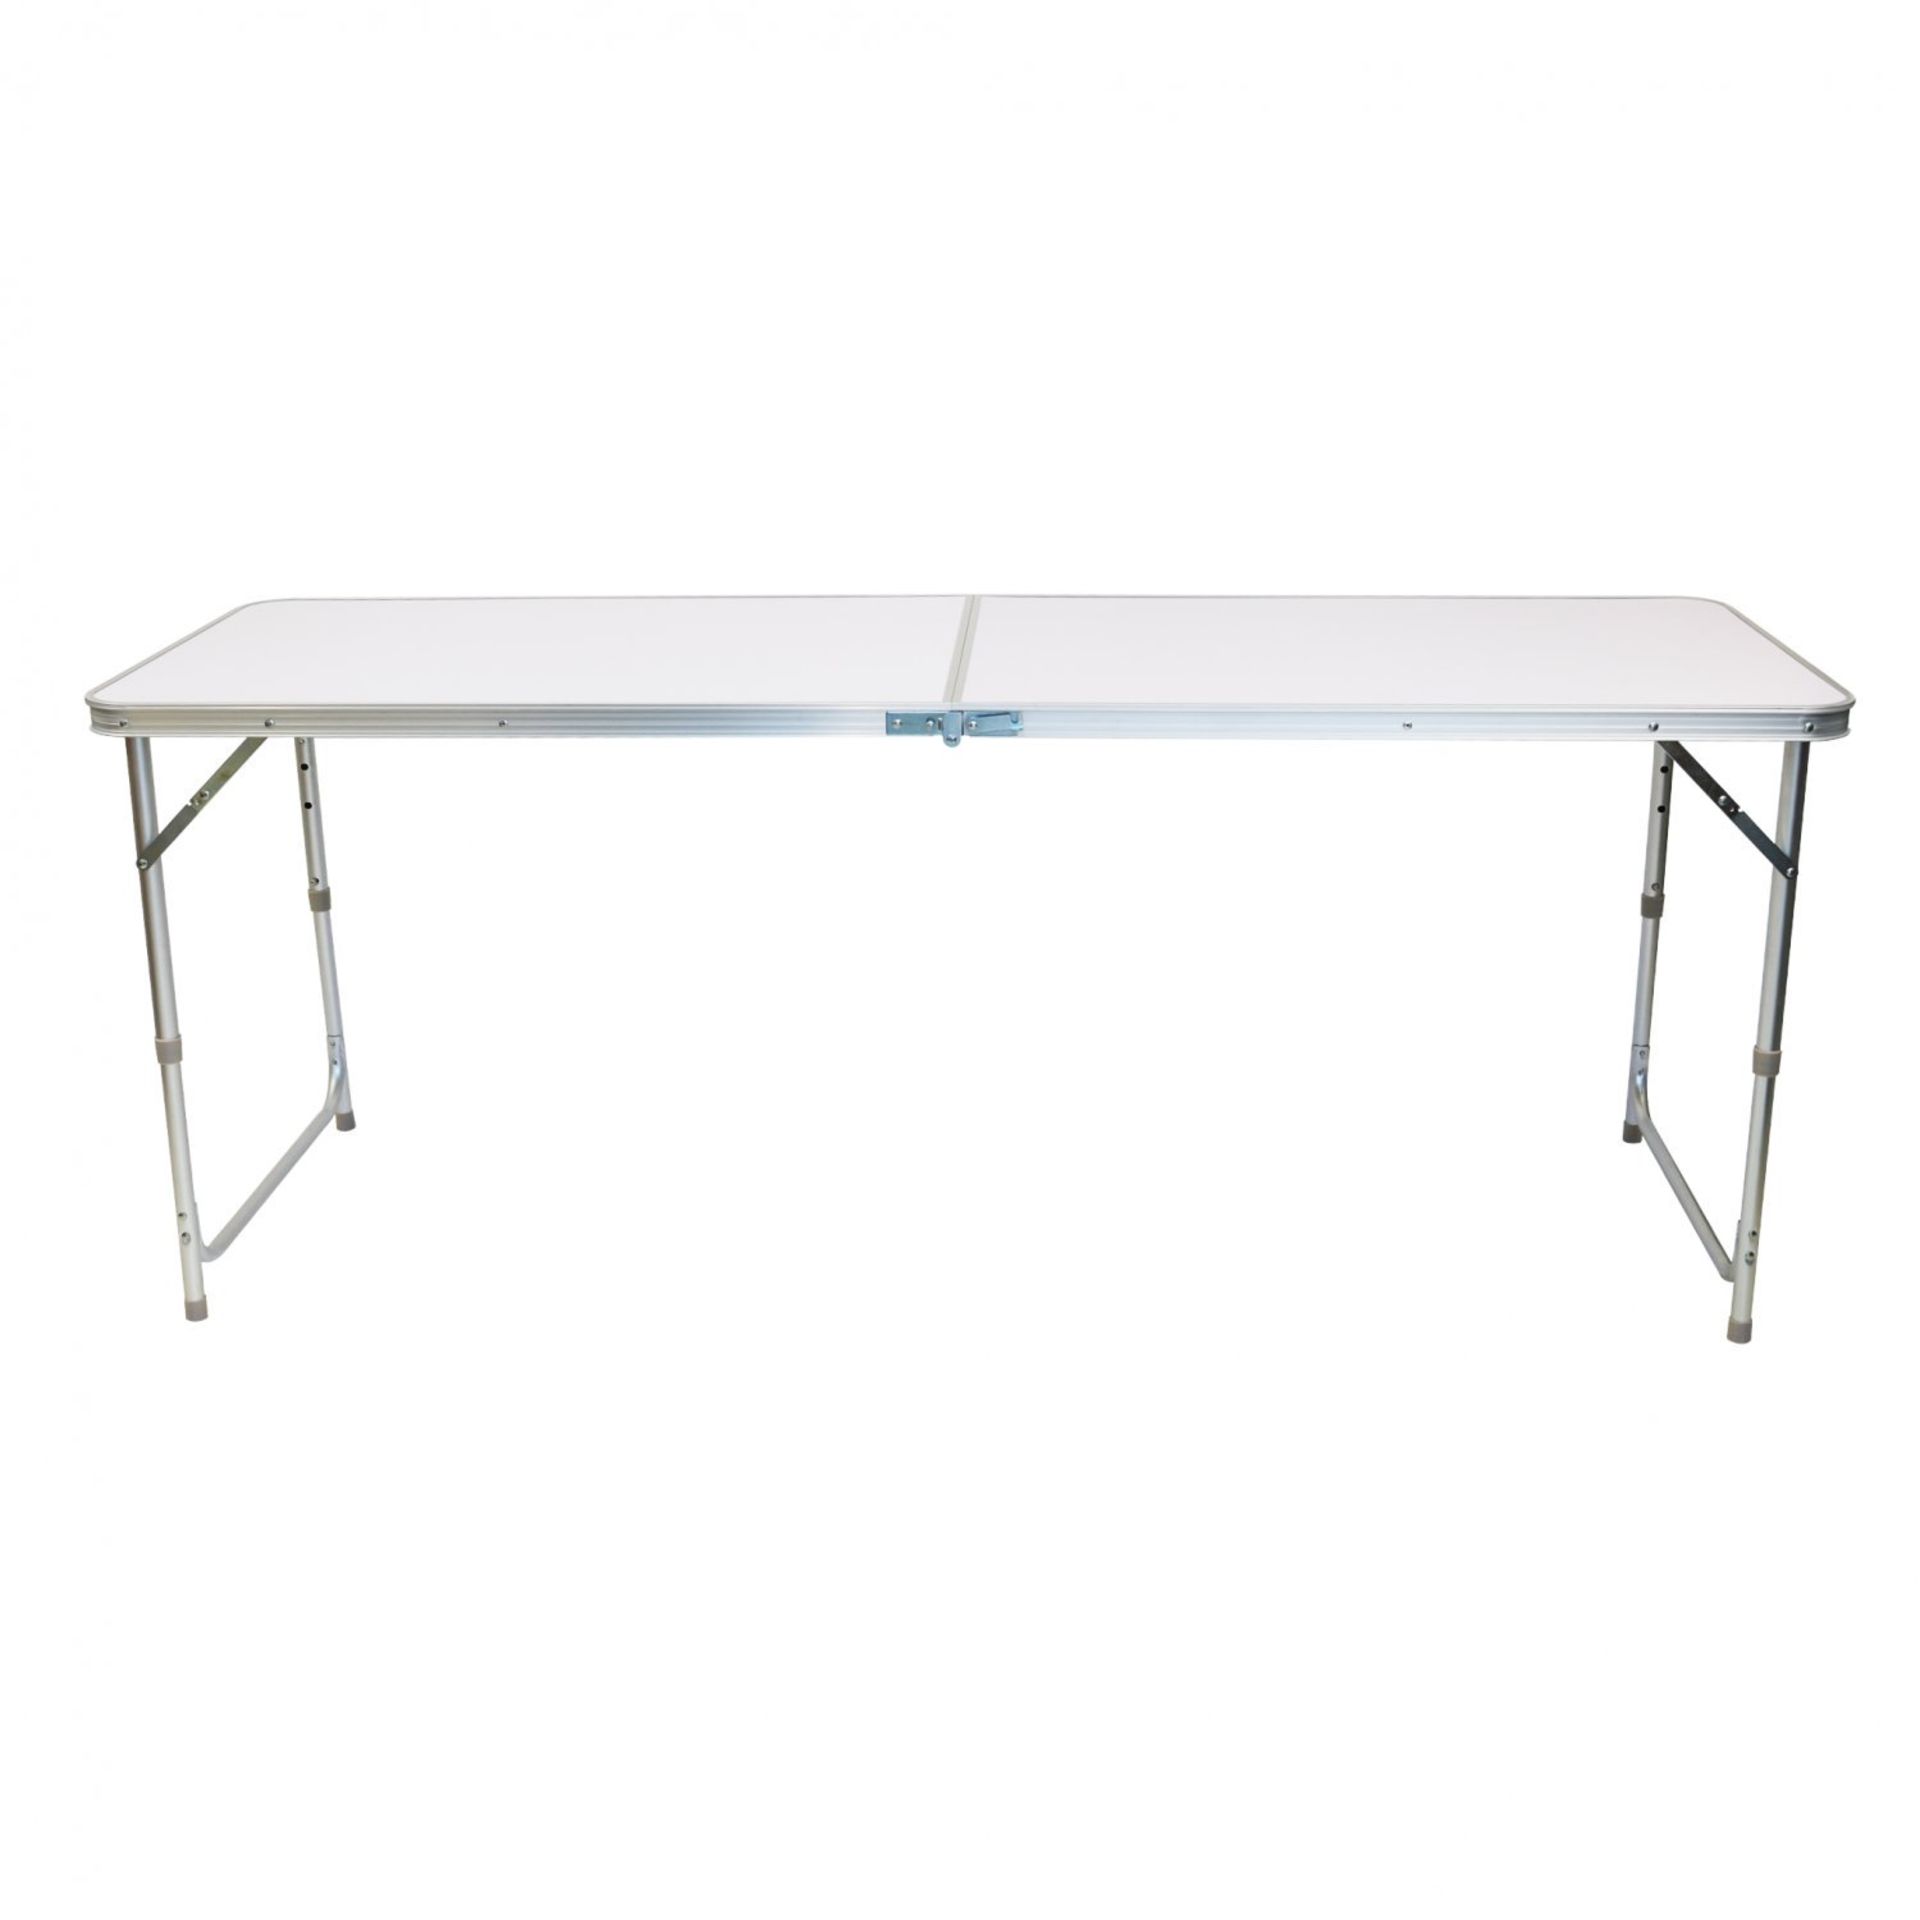 (PP26) 4ft Folding Outdoor Camping Kitchen Work Top Table The aluminium folding picnic table... - Image 2 of 2